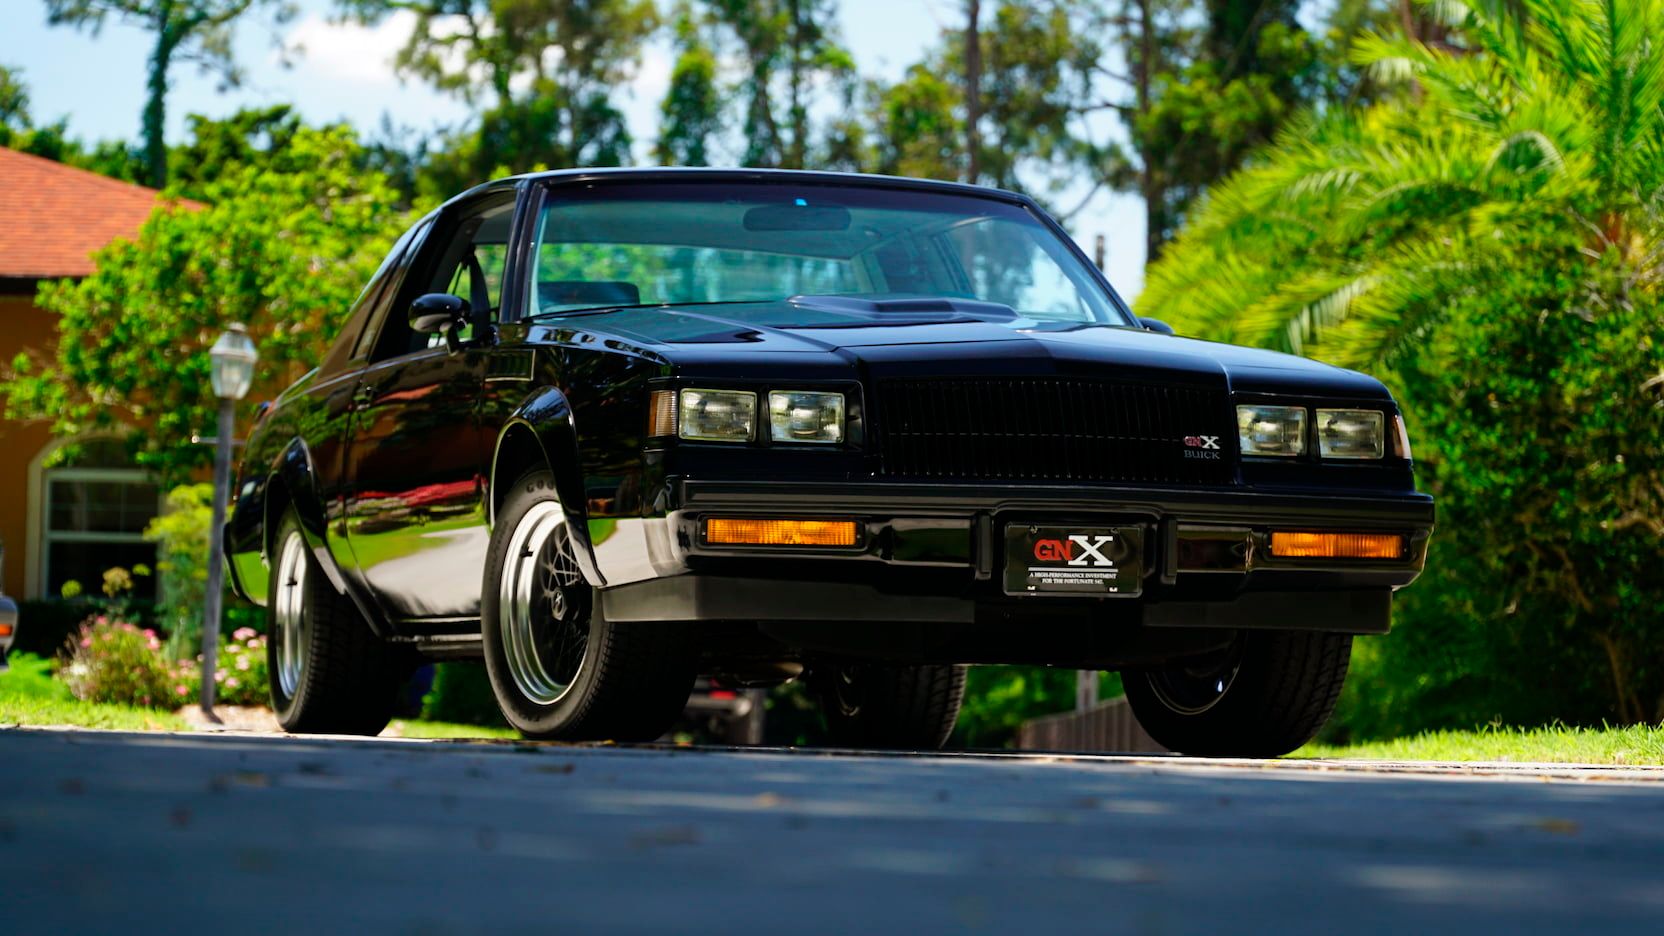 1987 Buick GNX, front view down low